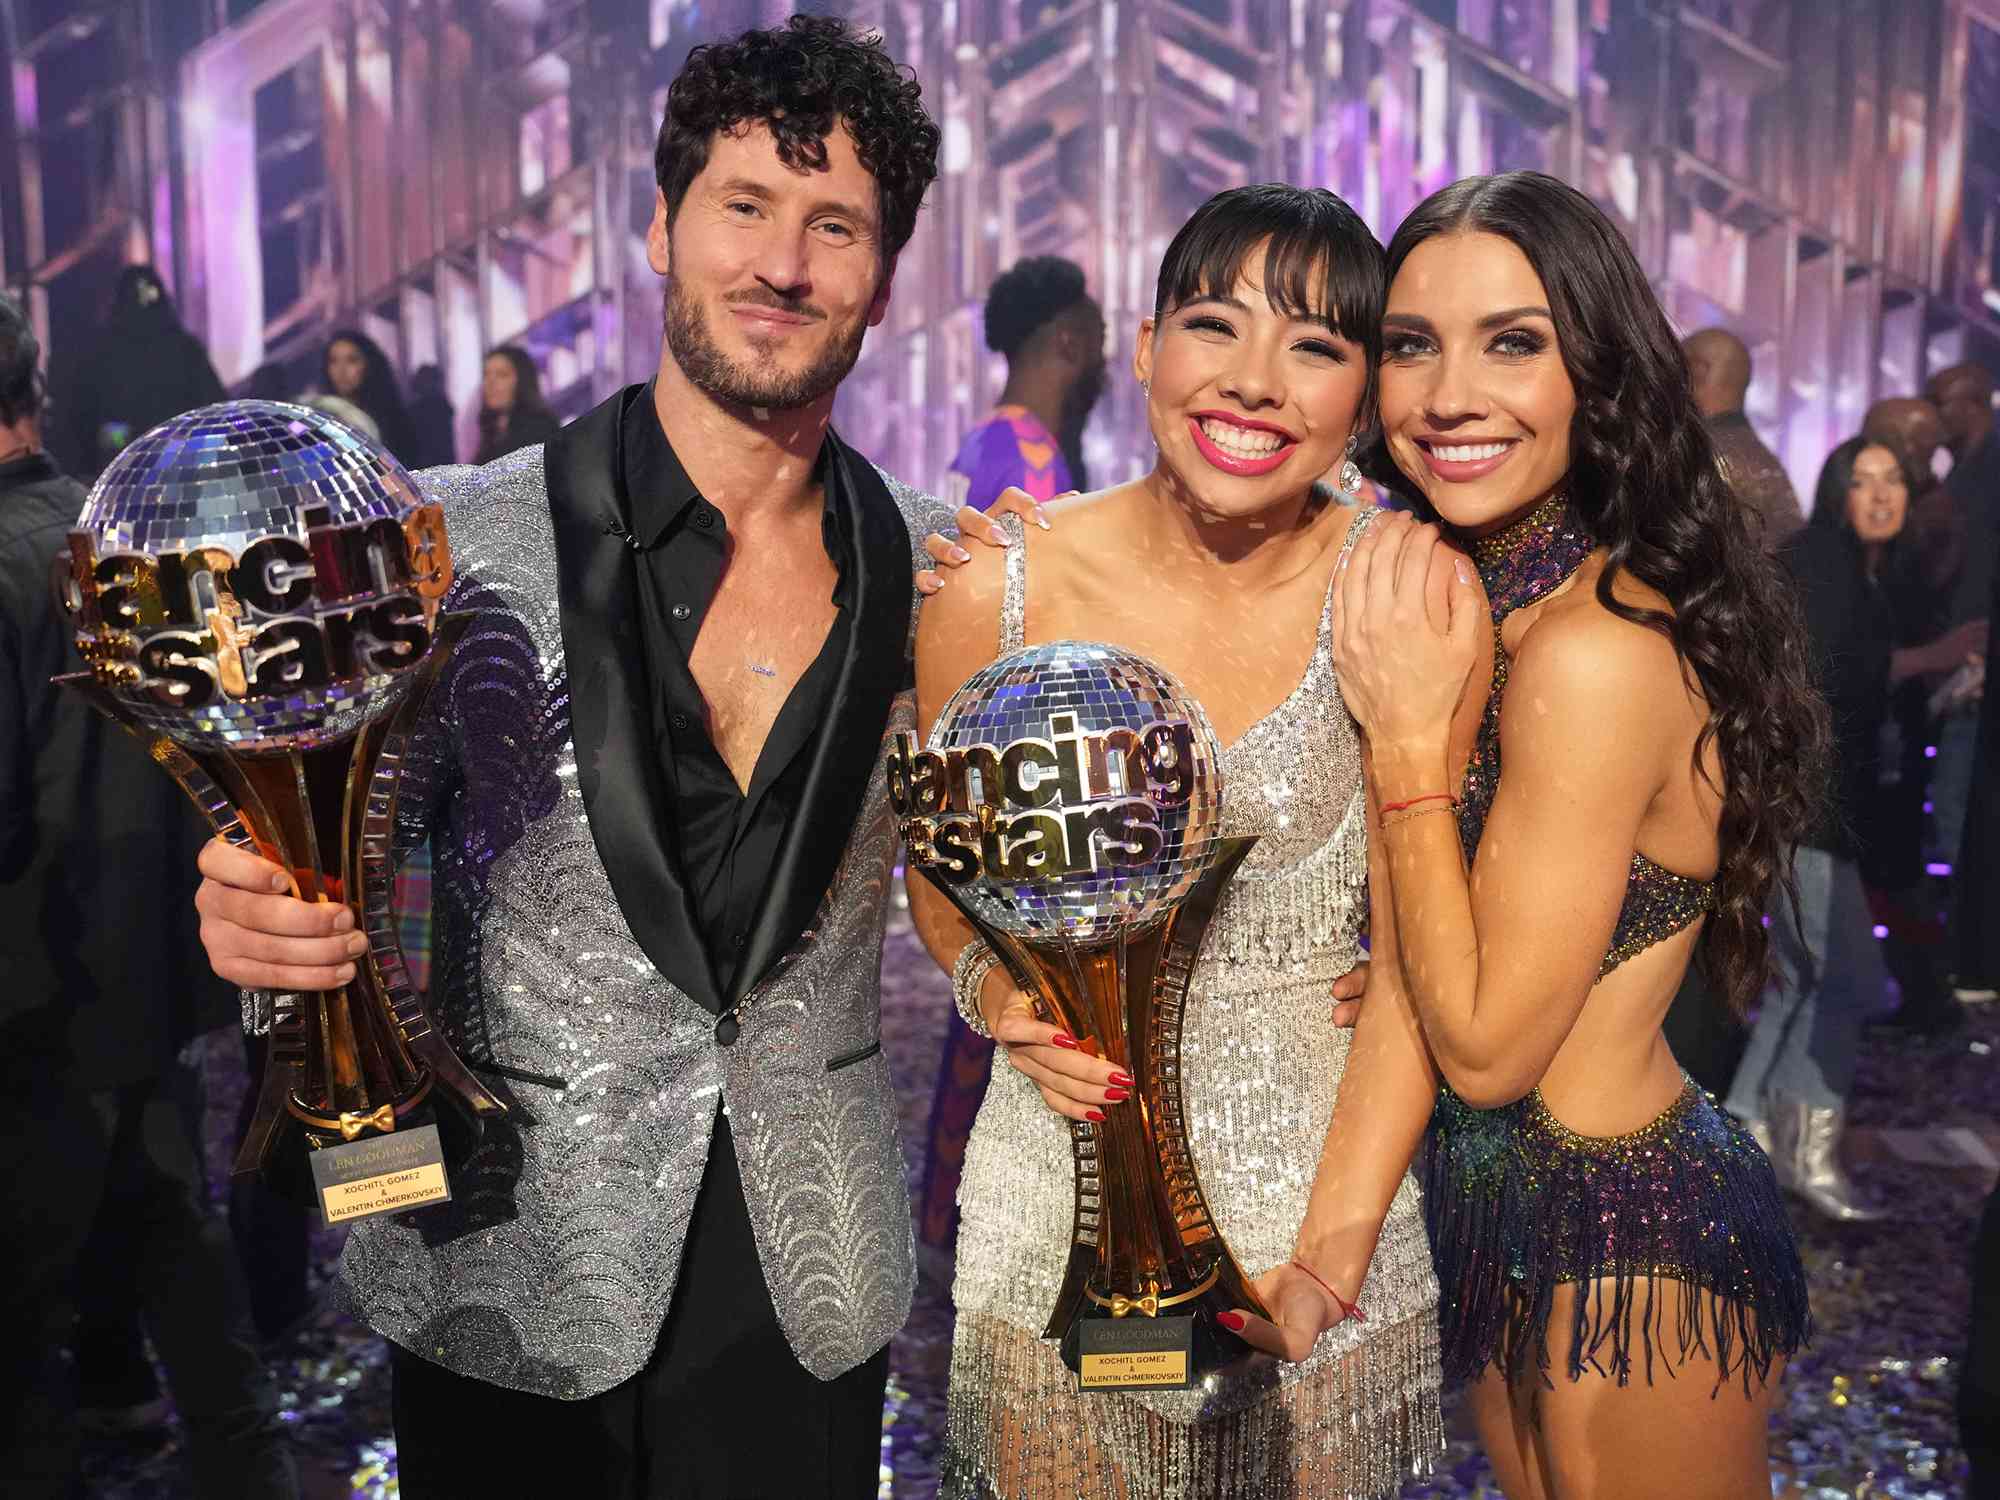 Val Chmerkovsky, Xochitl Gomez, and Jenna Johnson after the finale of 'Dancing With the Stars'.